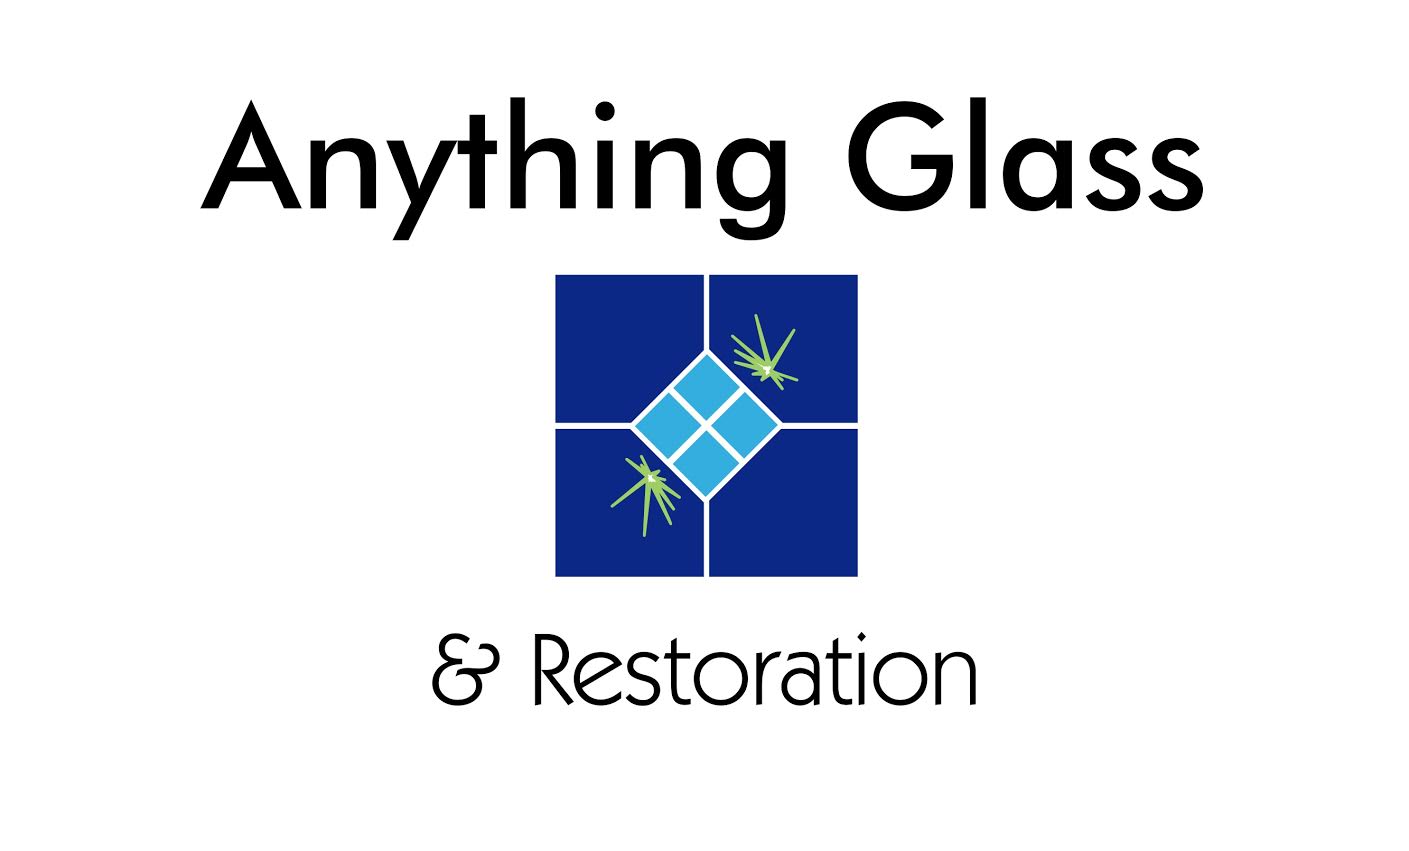 About Anything Glass & Restoration | Custom Glass in Fort Collins